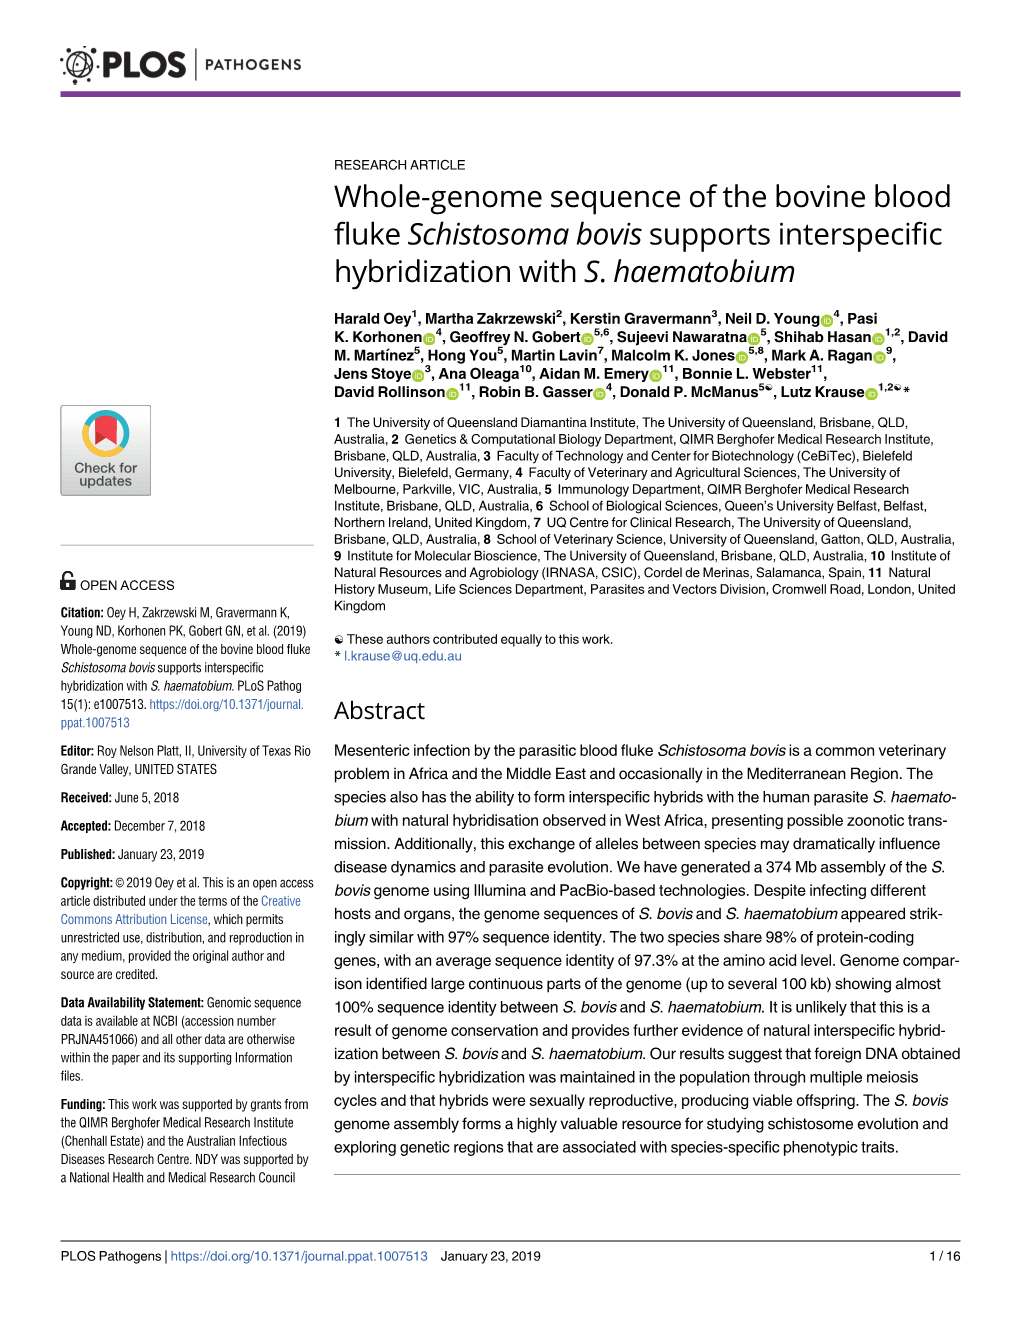 Whole-Genome Sequence of the Bovine Blood Fluke Schistosoma Bovis Supports Interspecific Hybridization with S